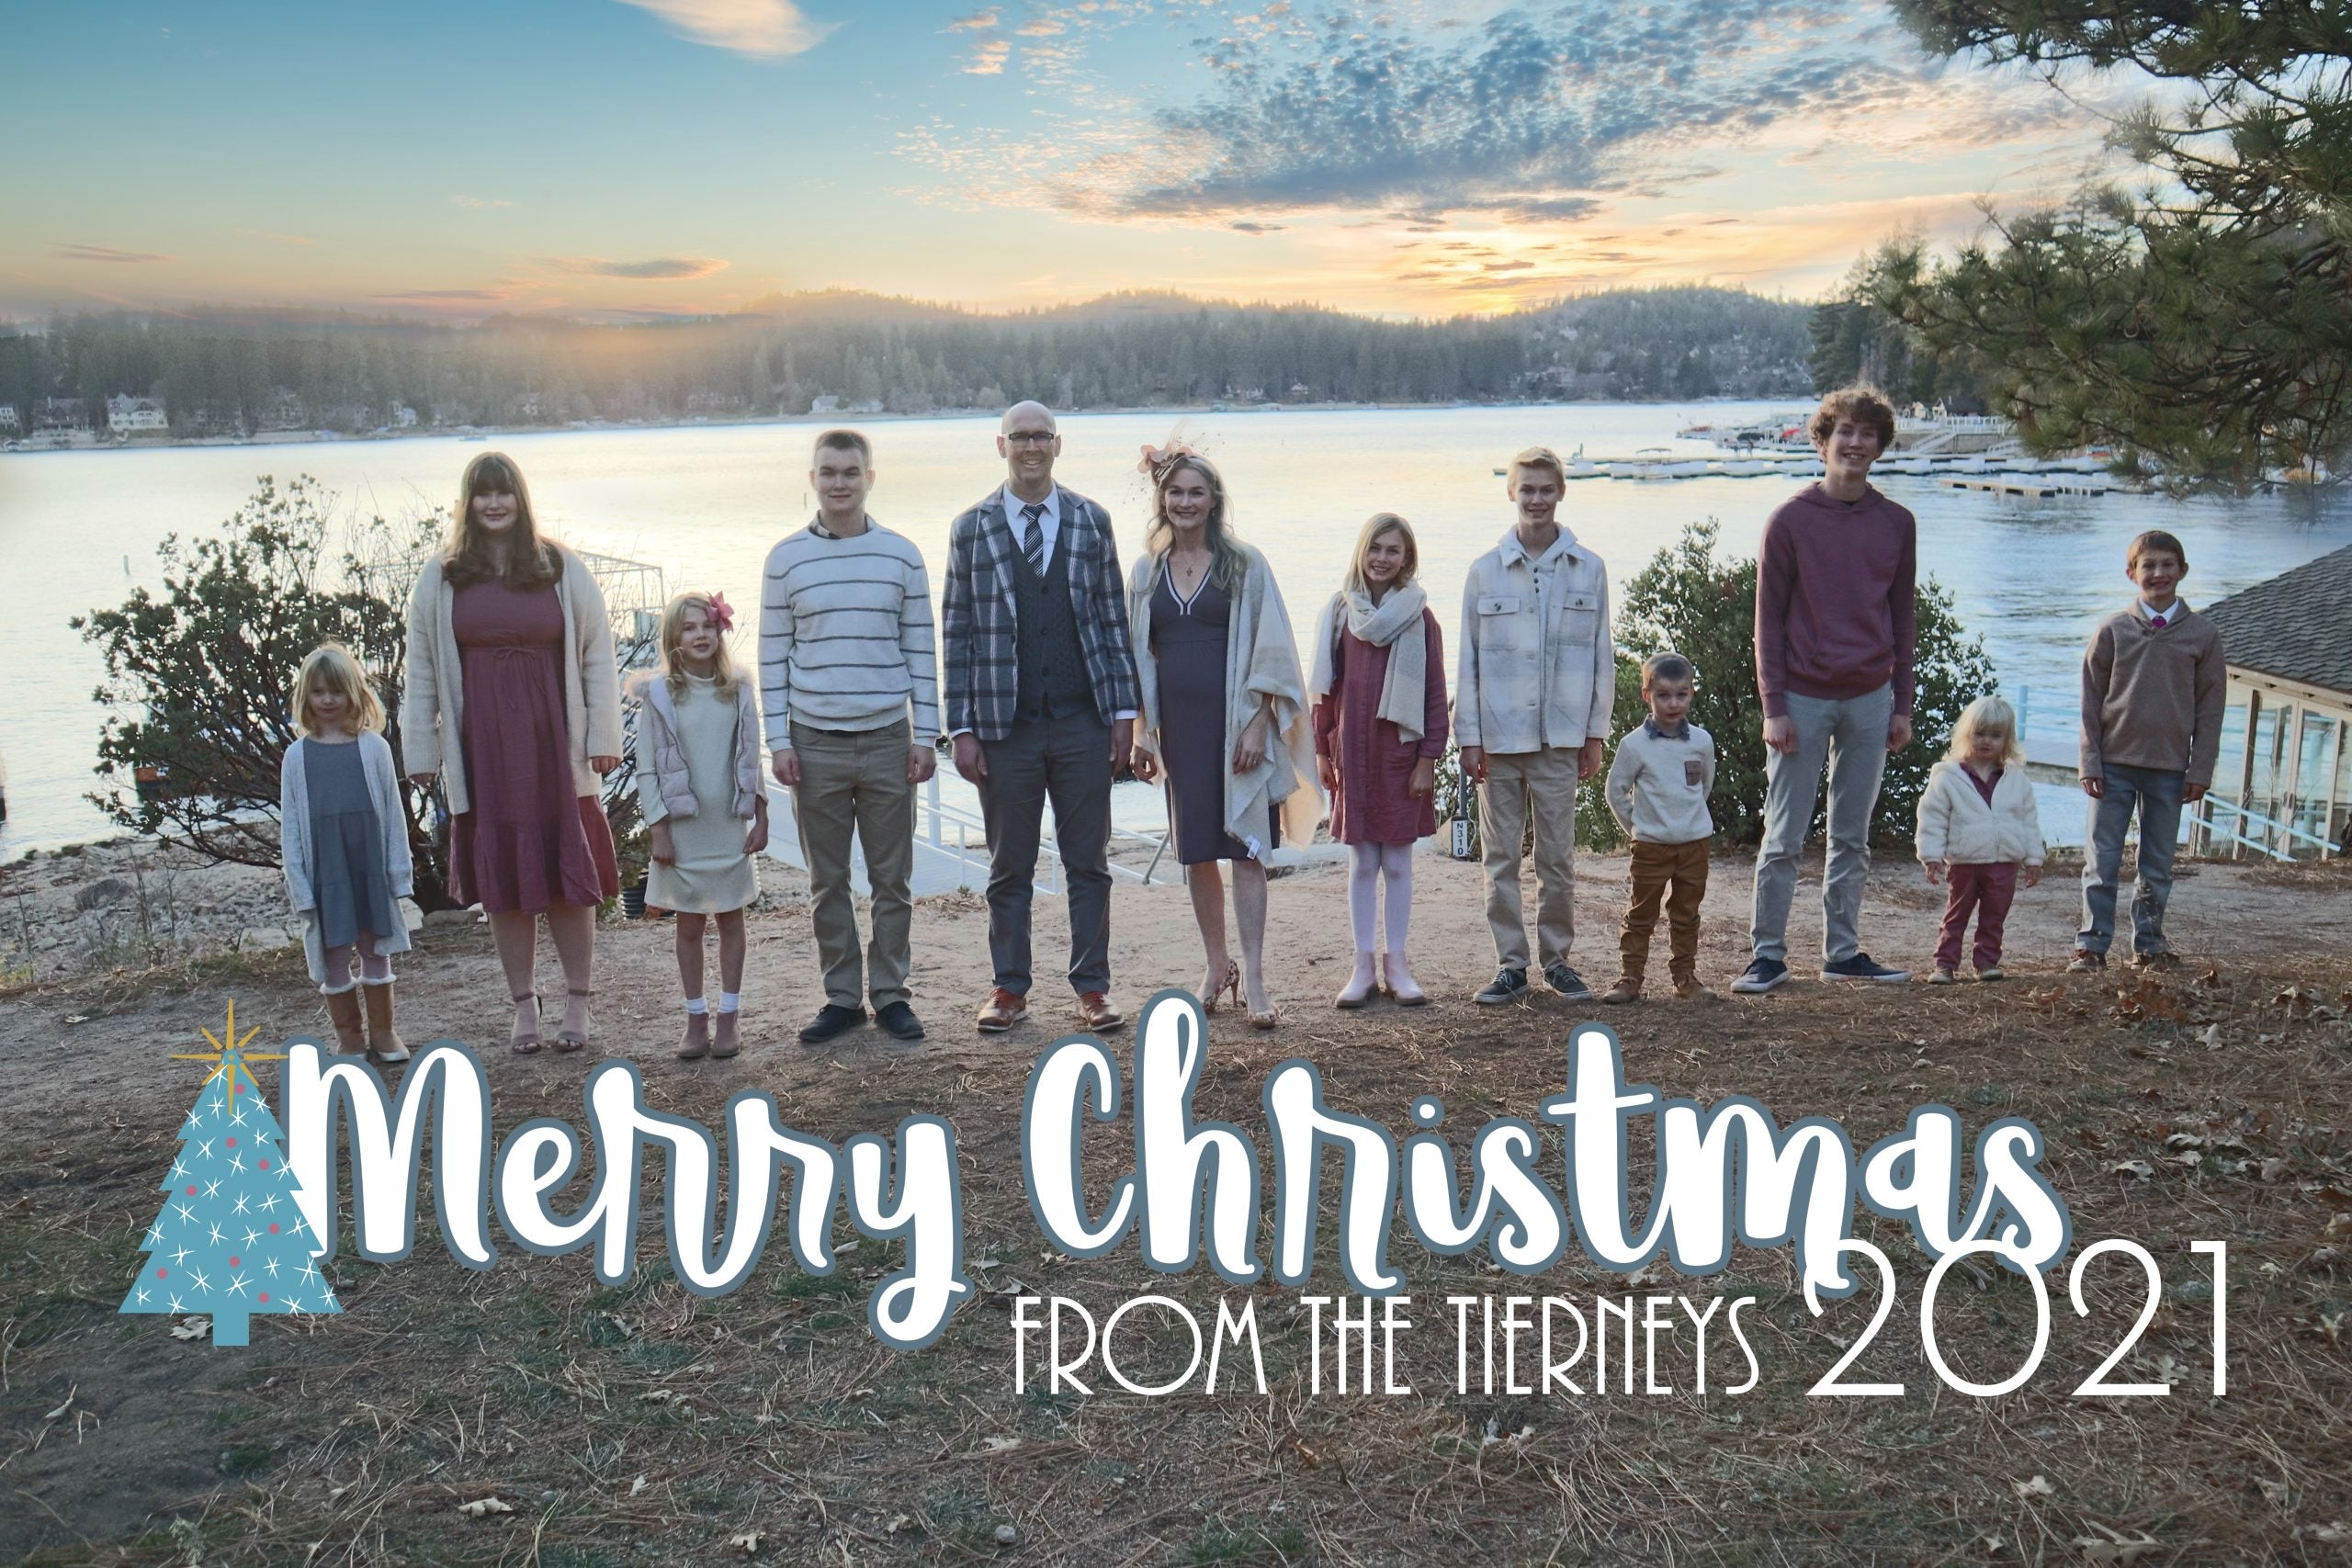 Merry Christmas from the Tierneys, 2021